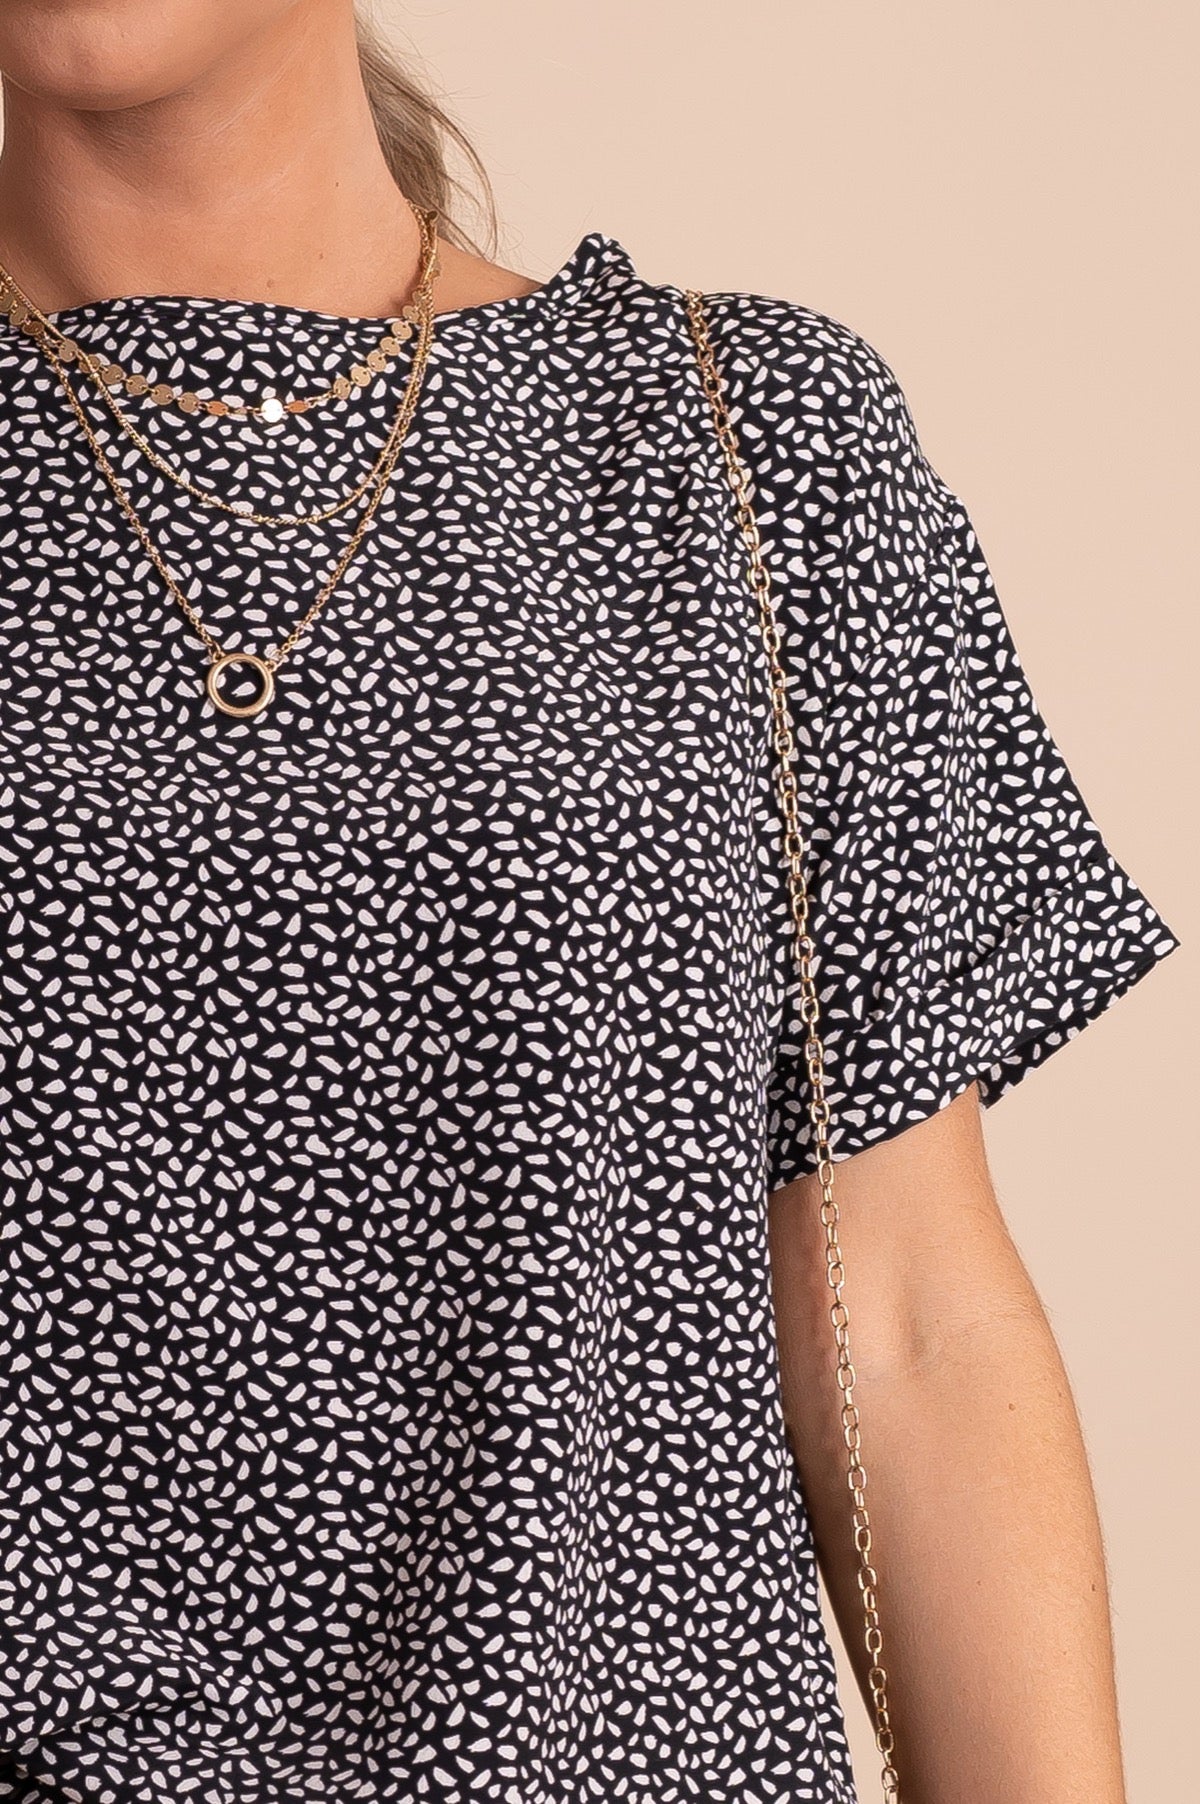 black with white speckled patterned top